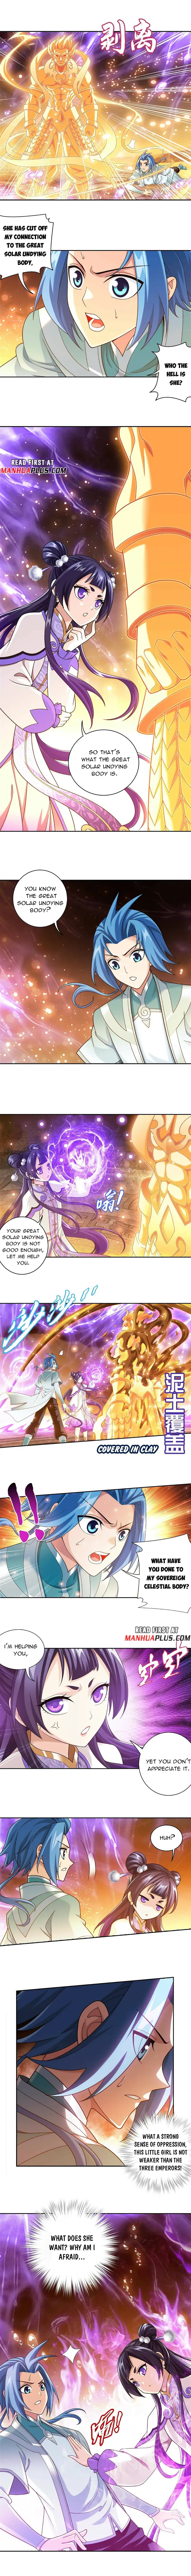 The Great Ruler Chapter 392 page 2